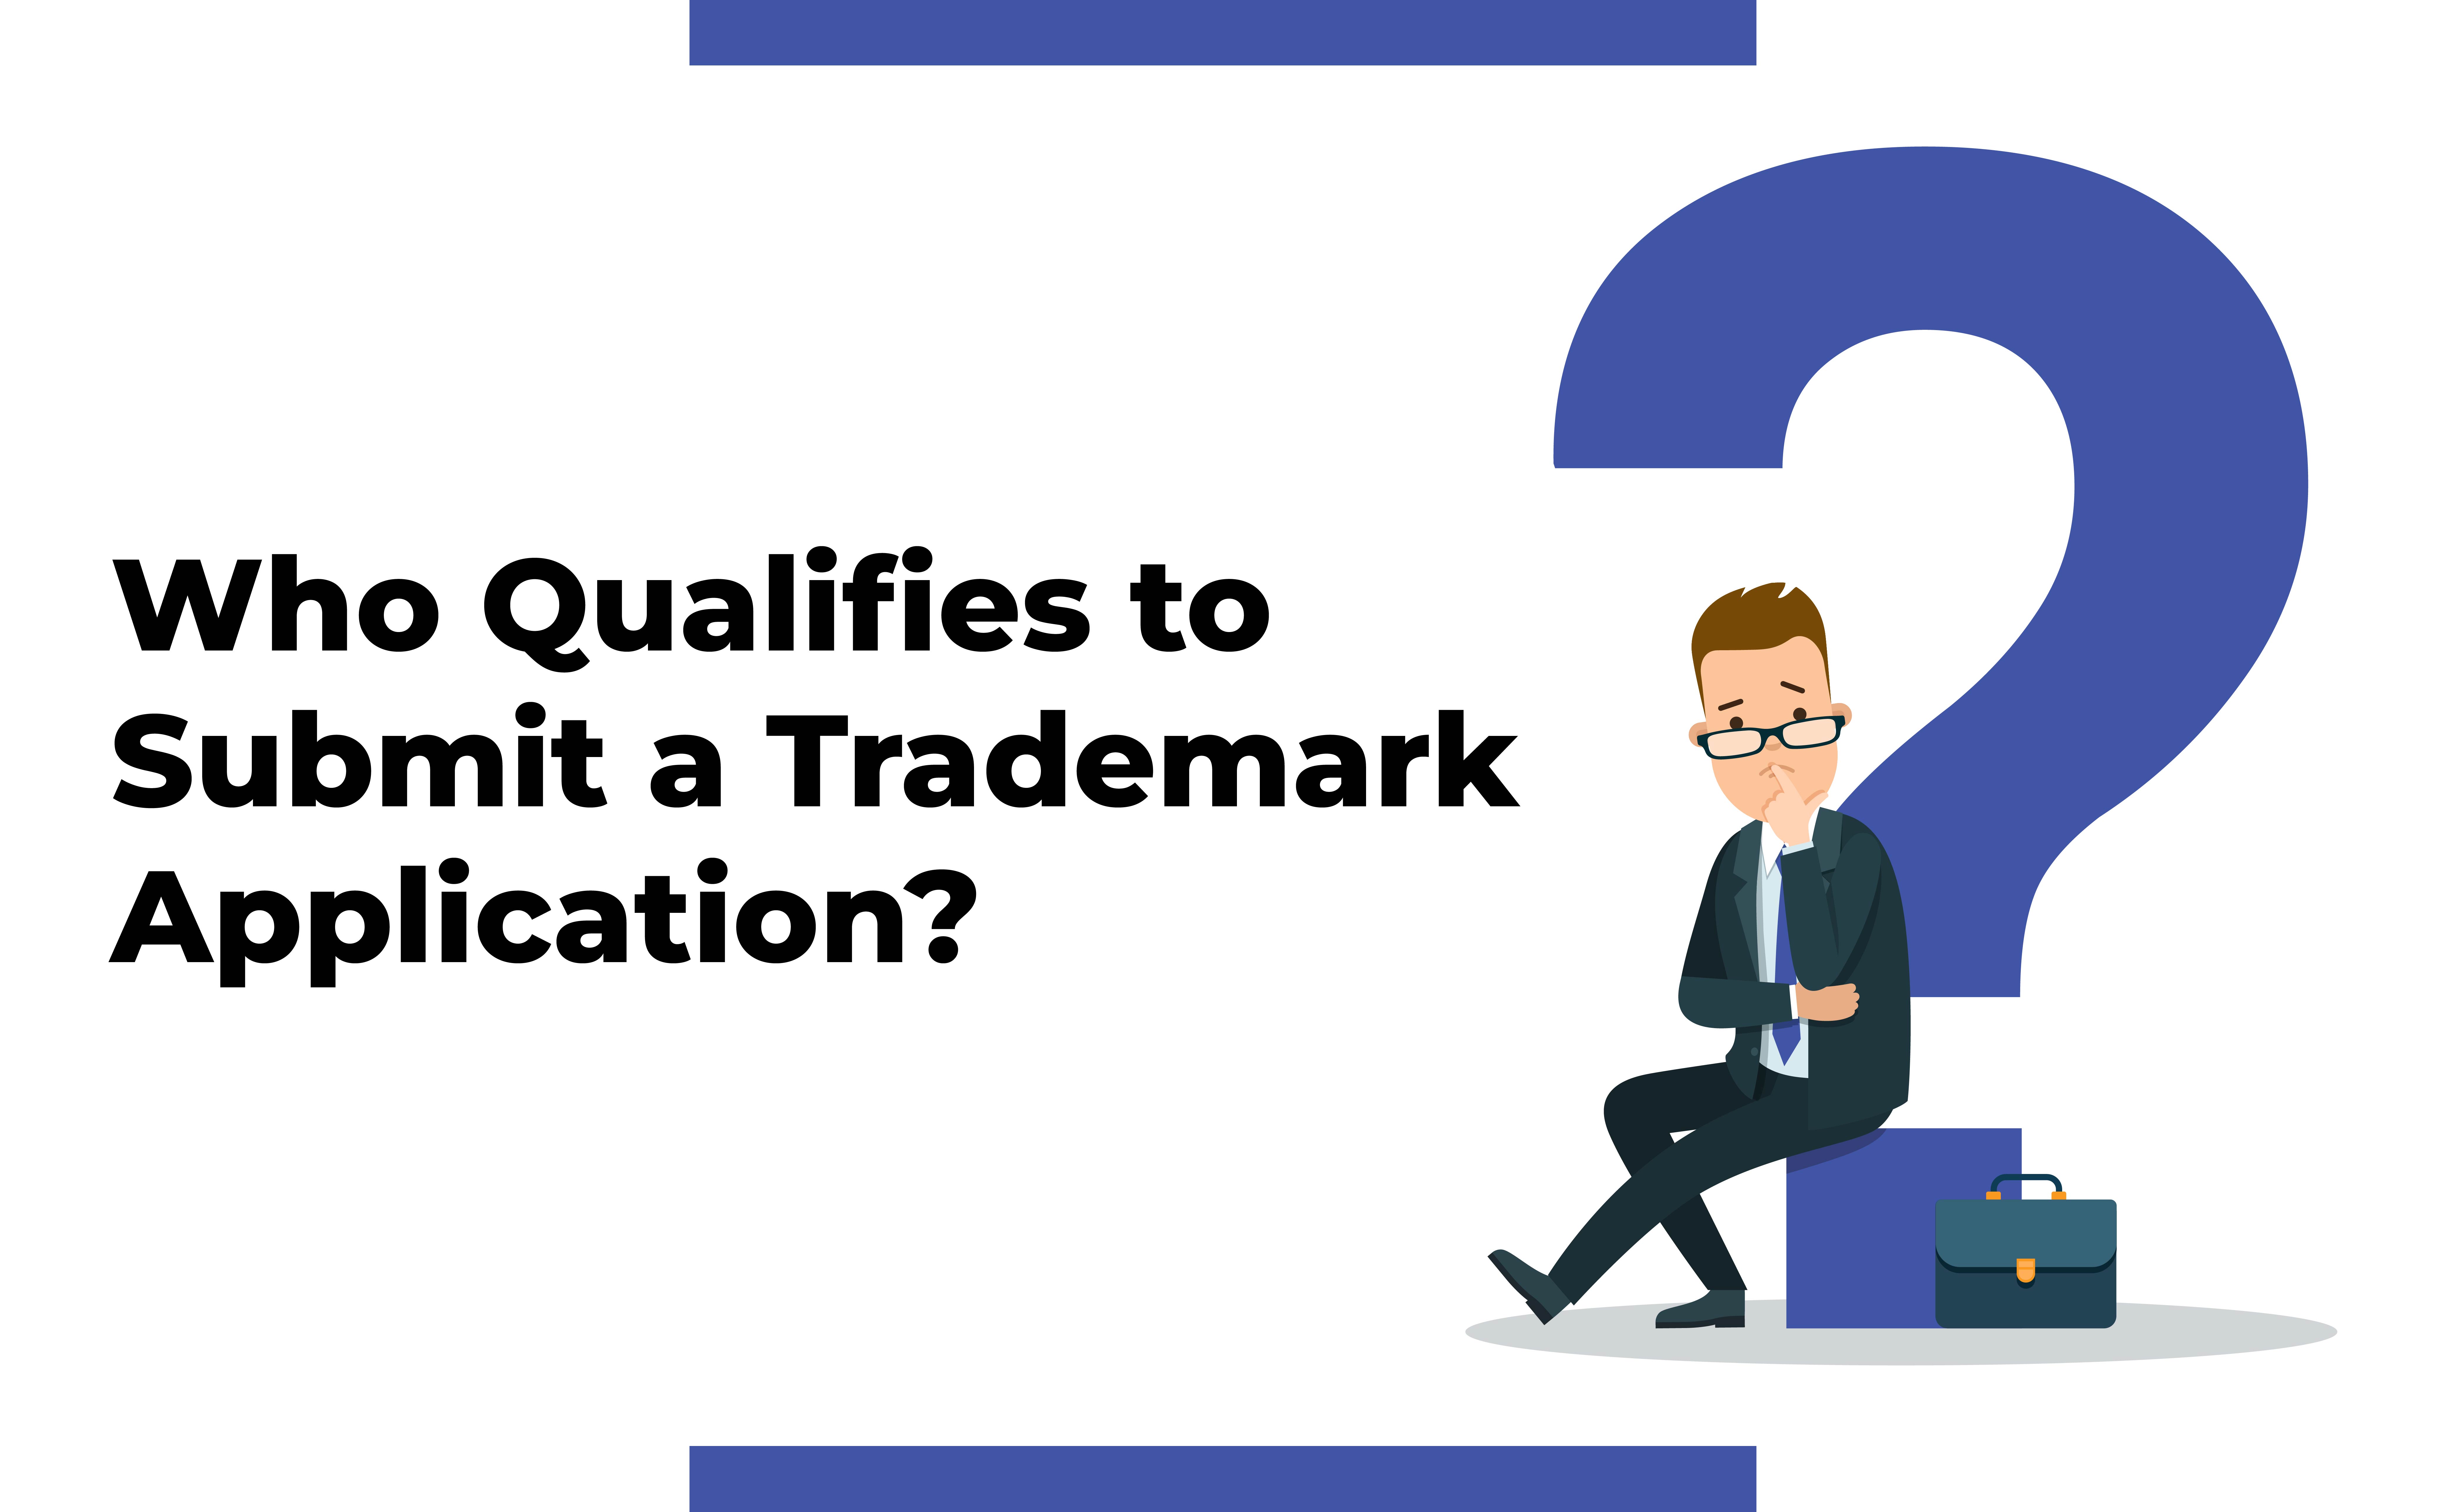 Who is Eligible for Submitting a Trademark Application?